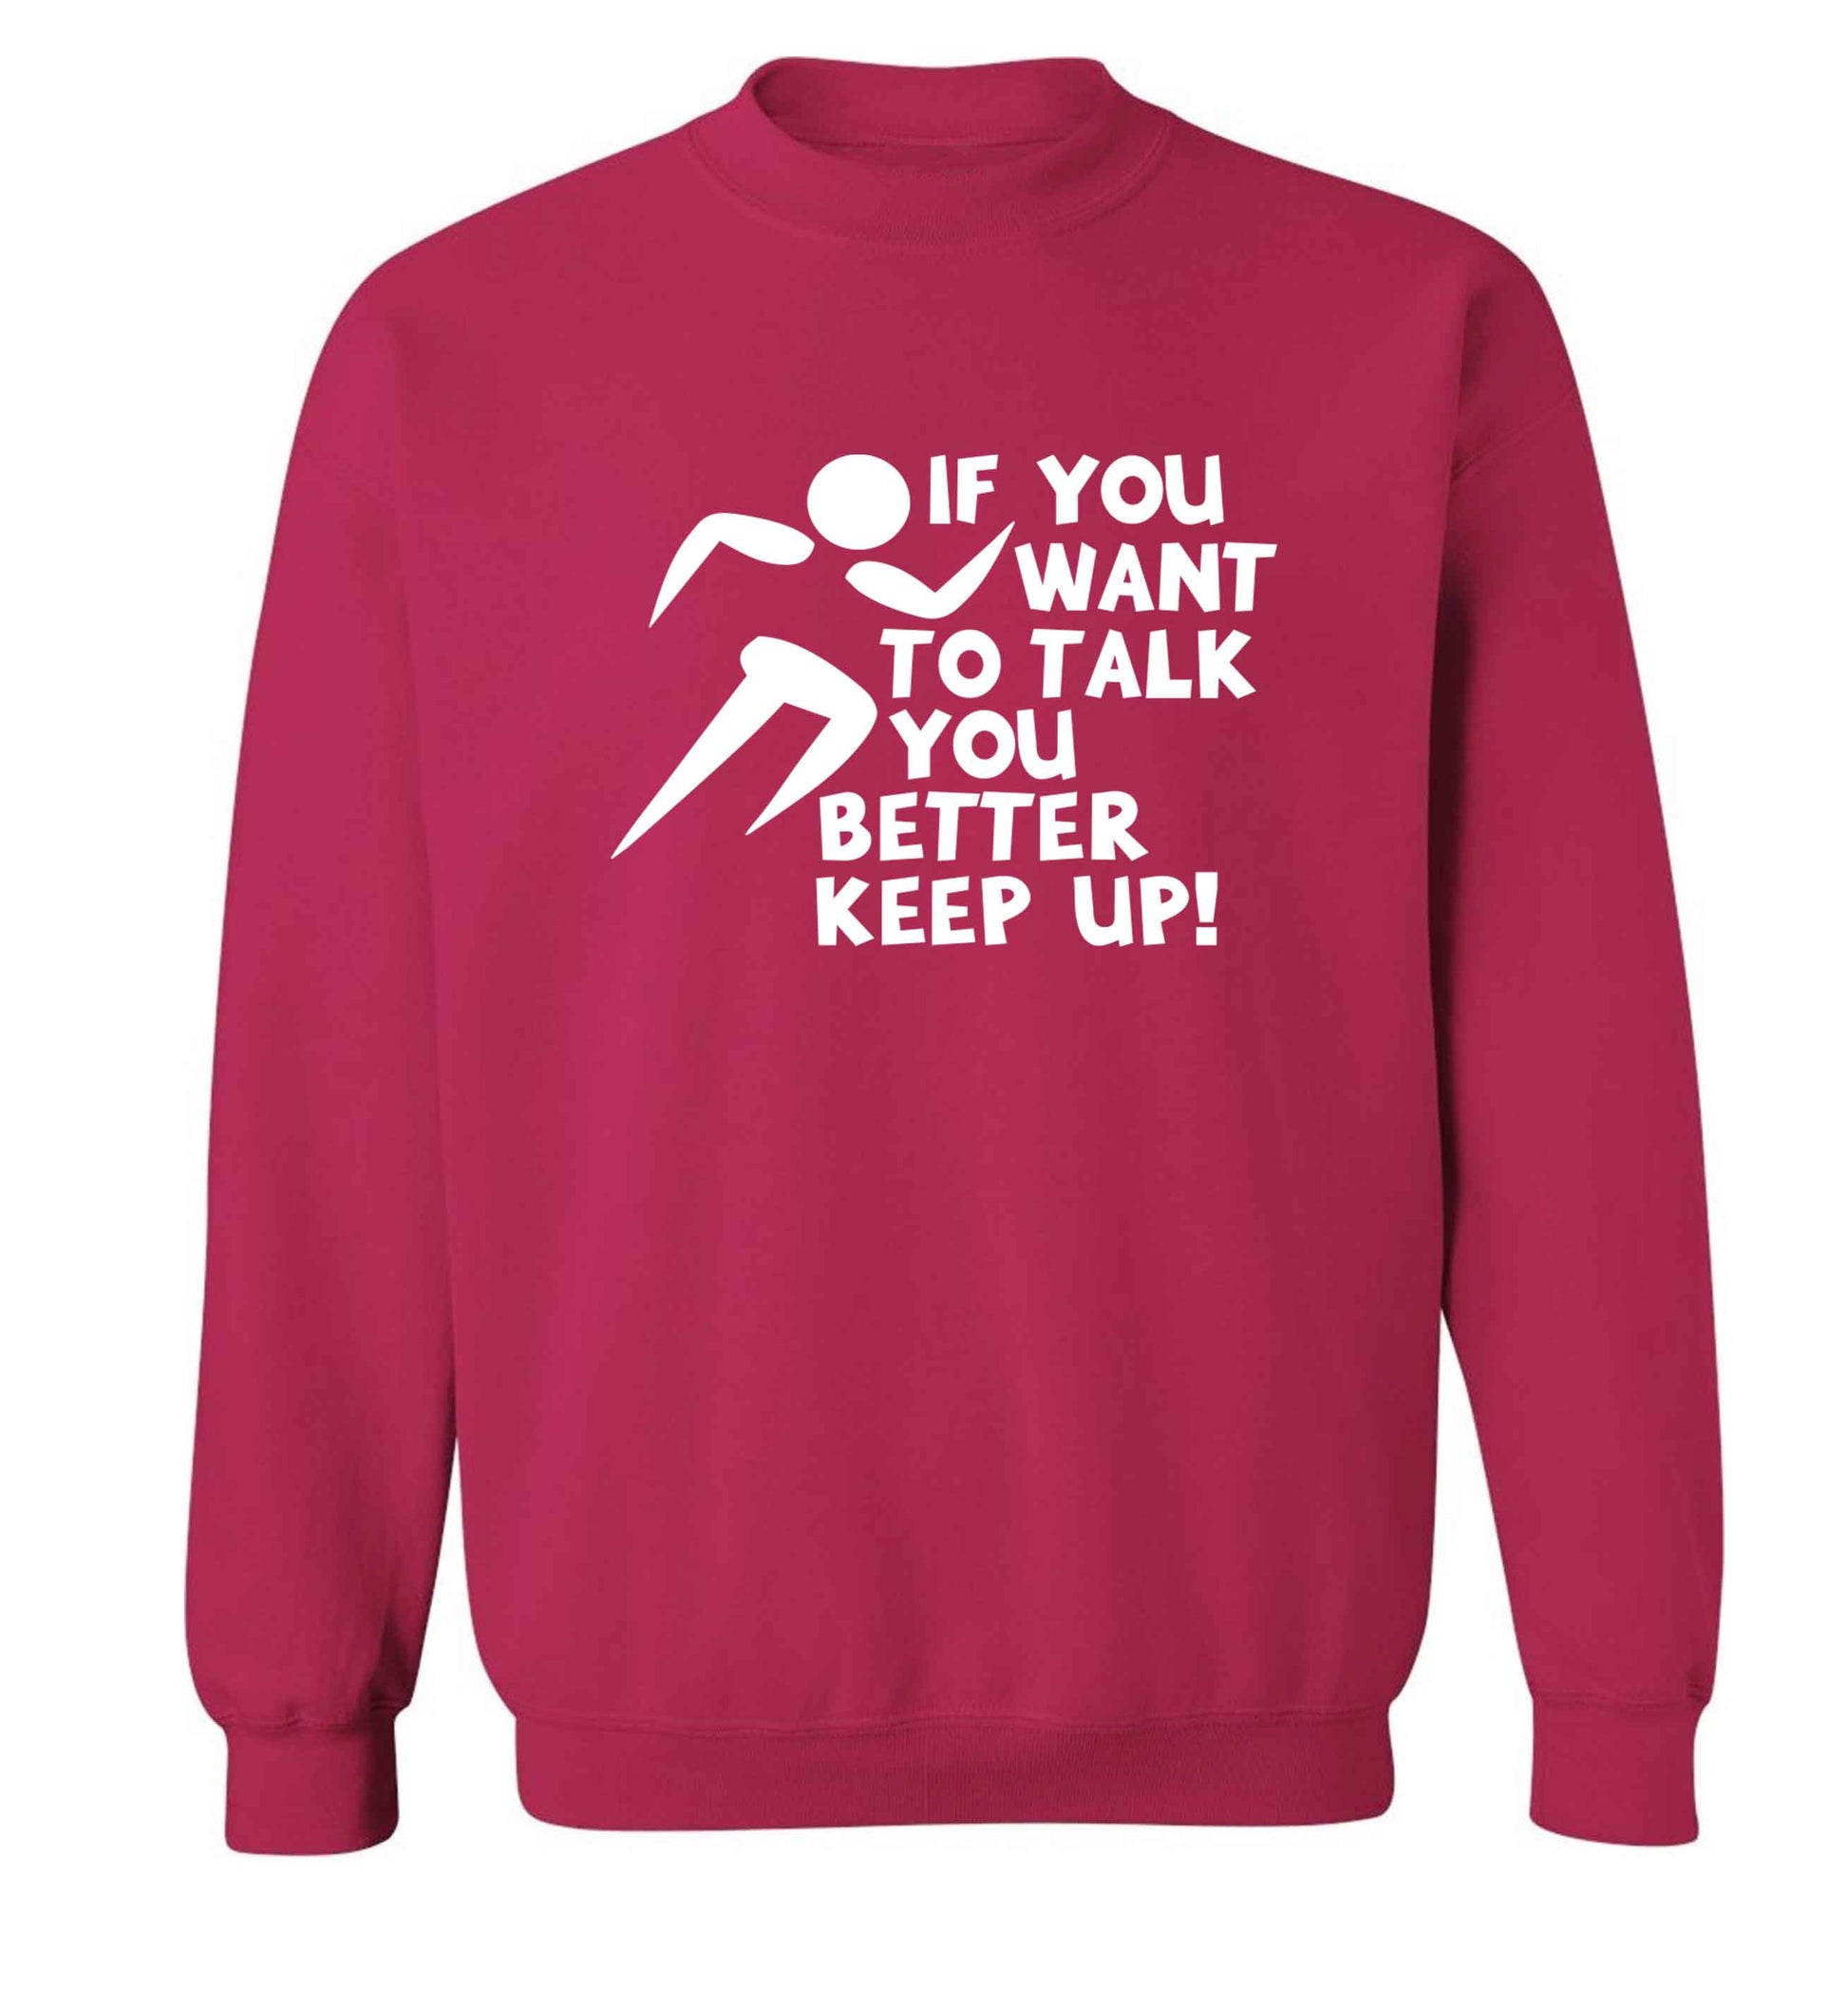 If you want to talk you better keep up! adult's unisex pink sweater 2XL